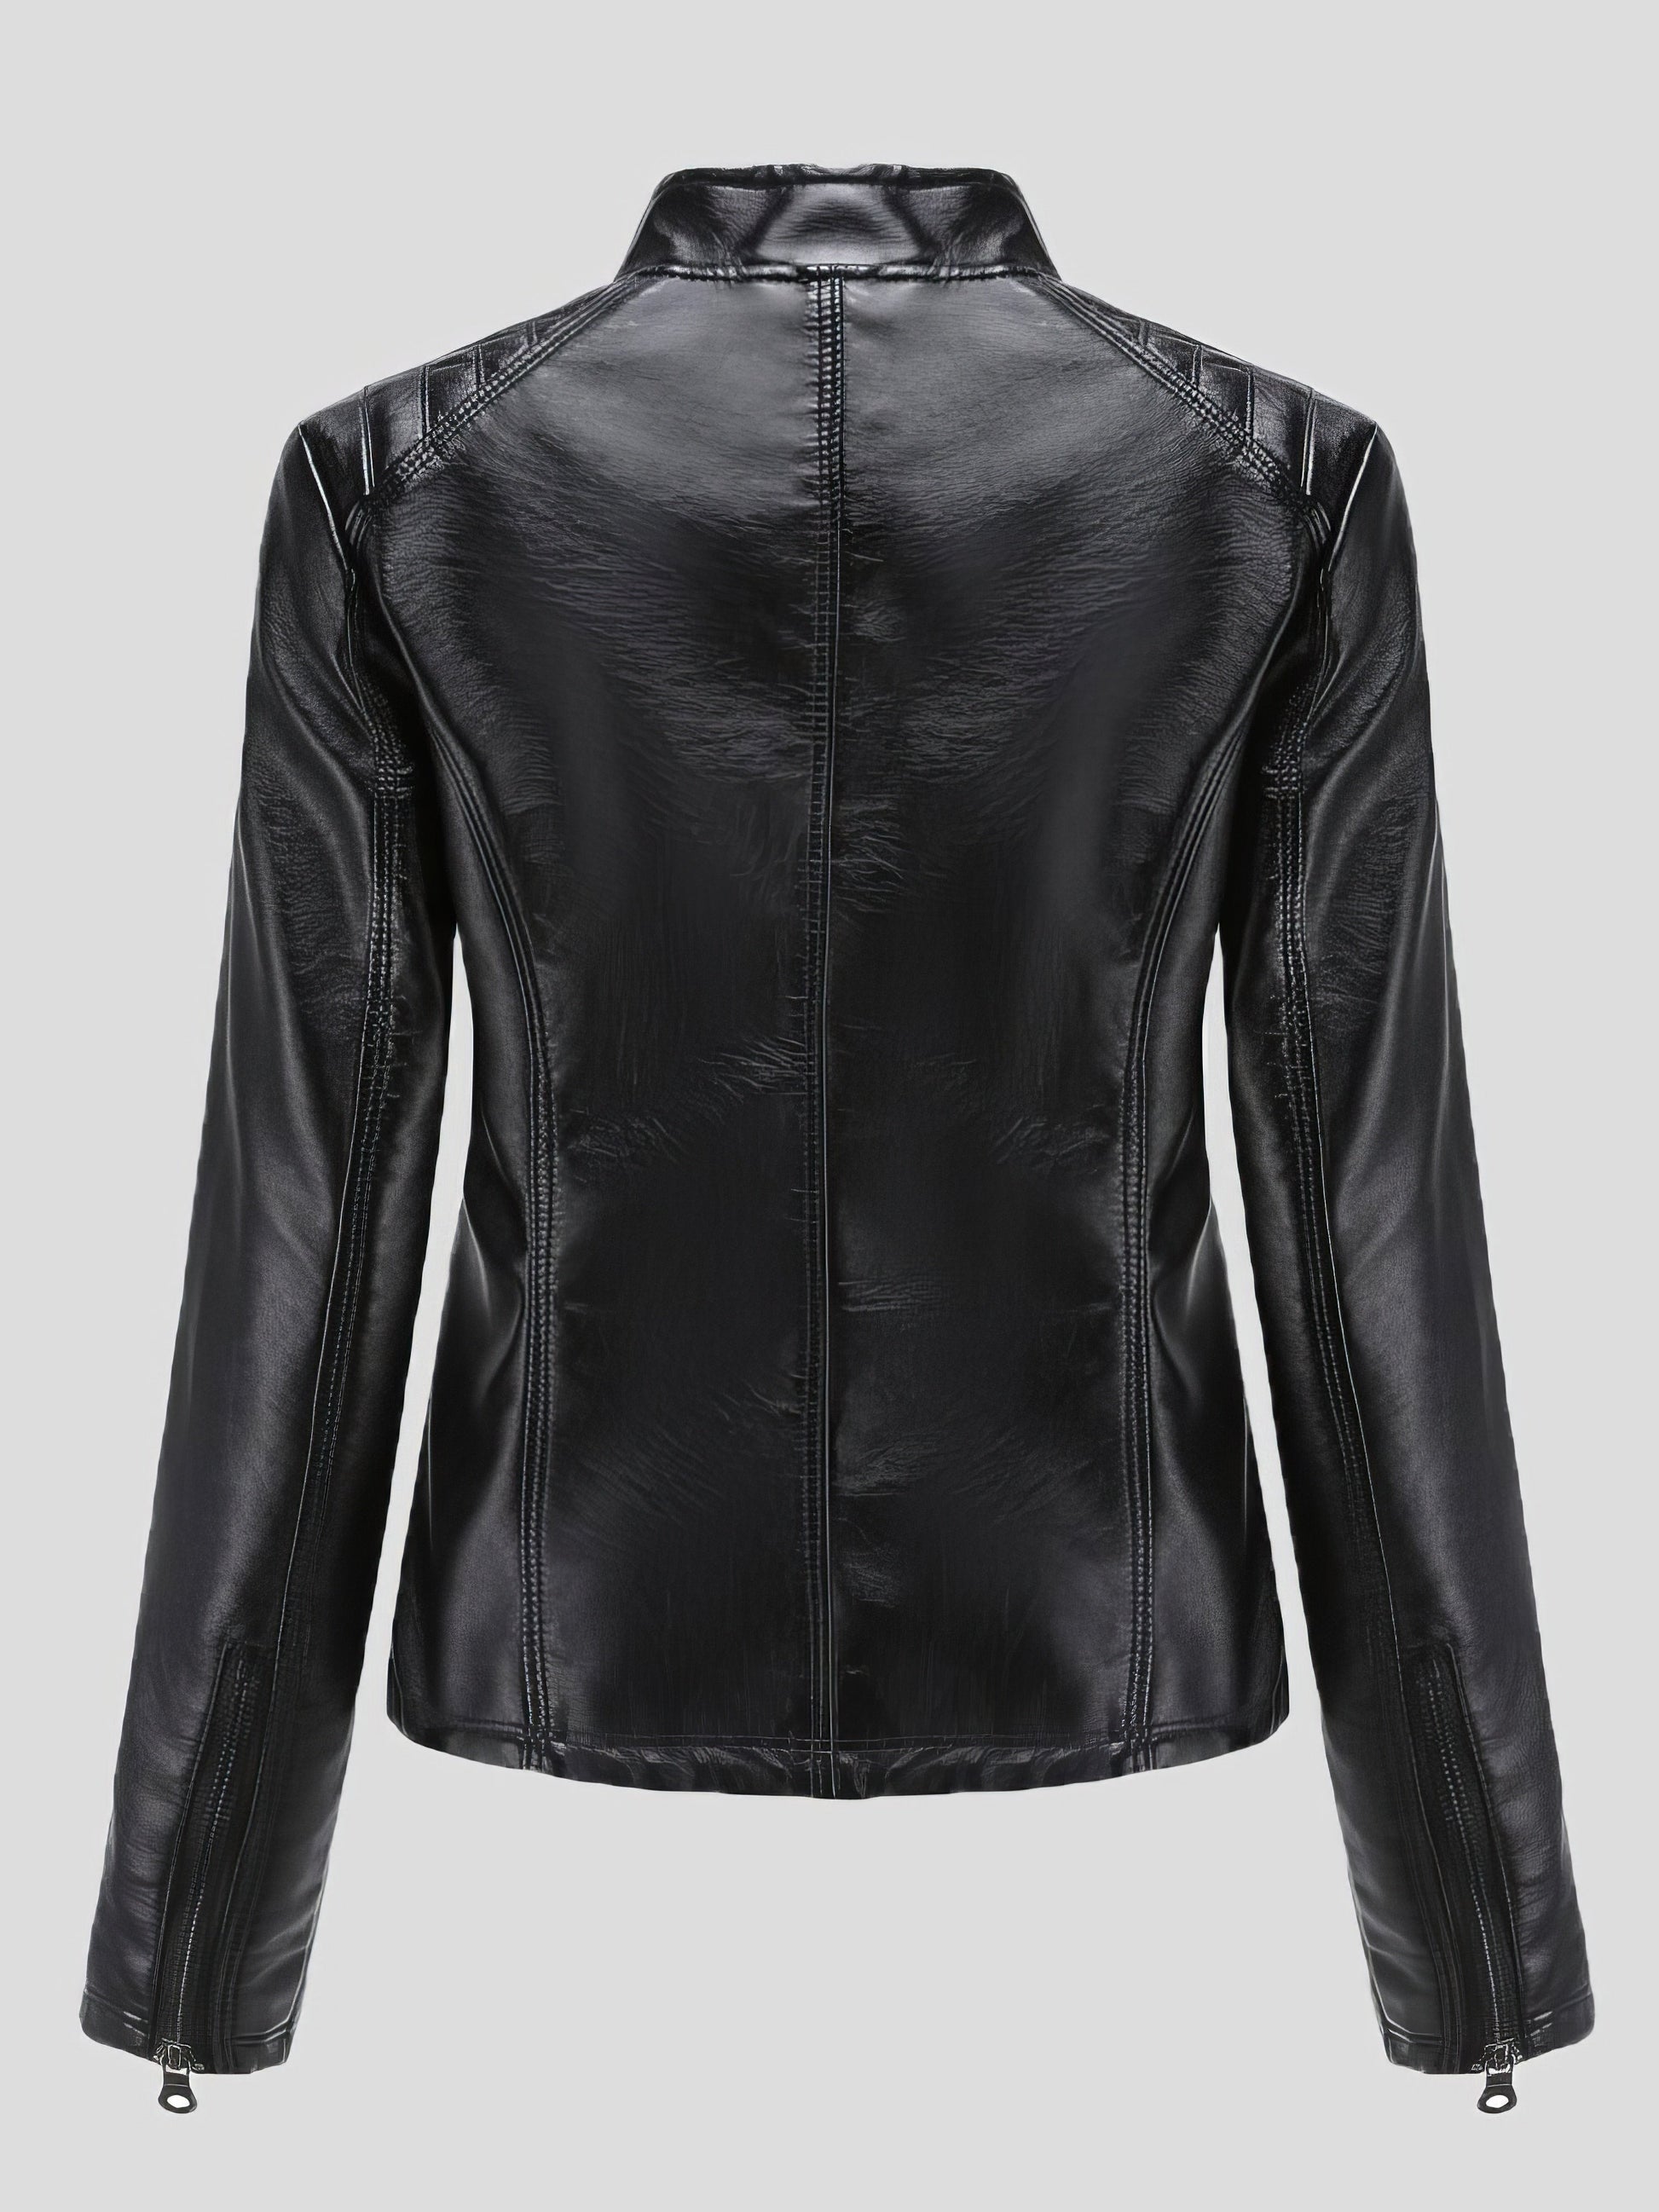 Jackets - Casual Stand-Collar Slim Solid Leather Jacket - MsDressly